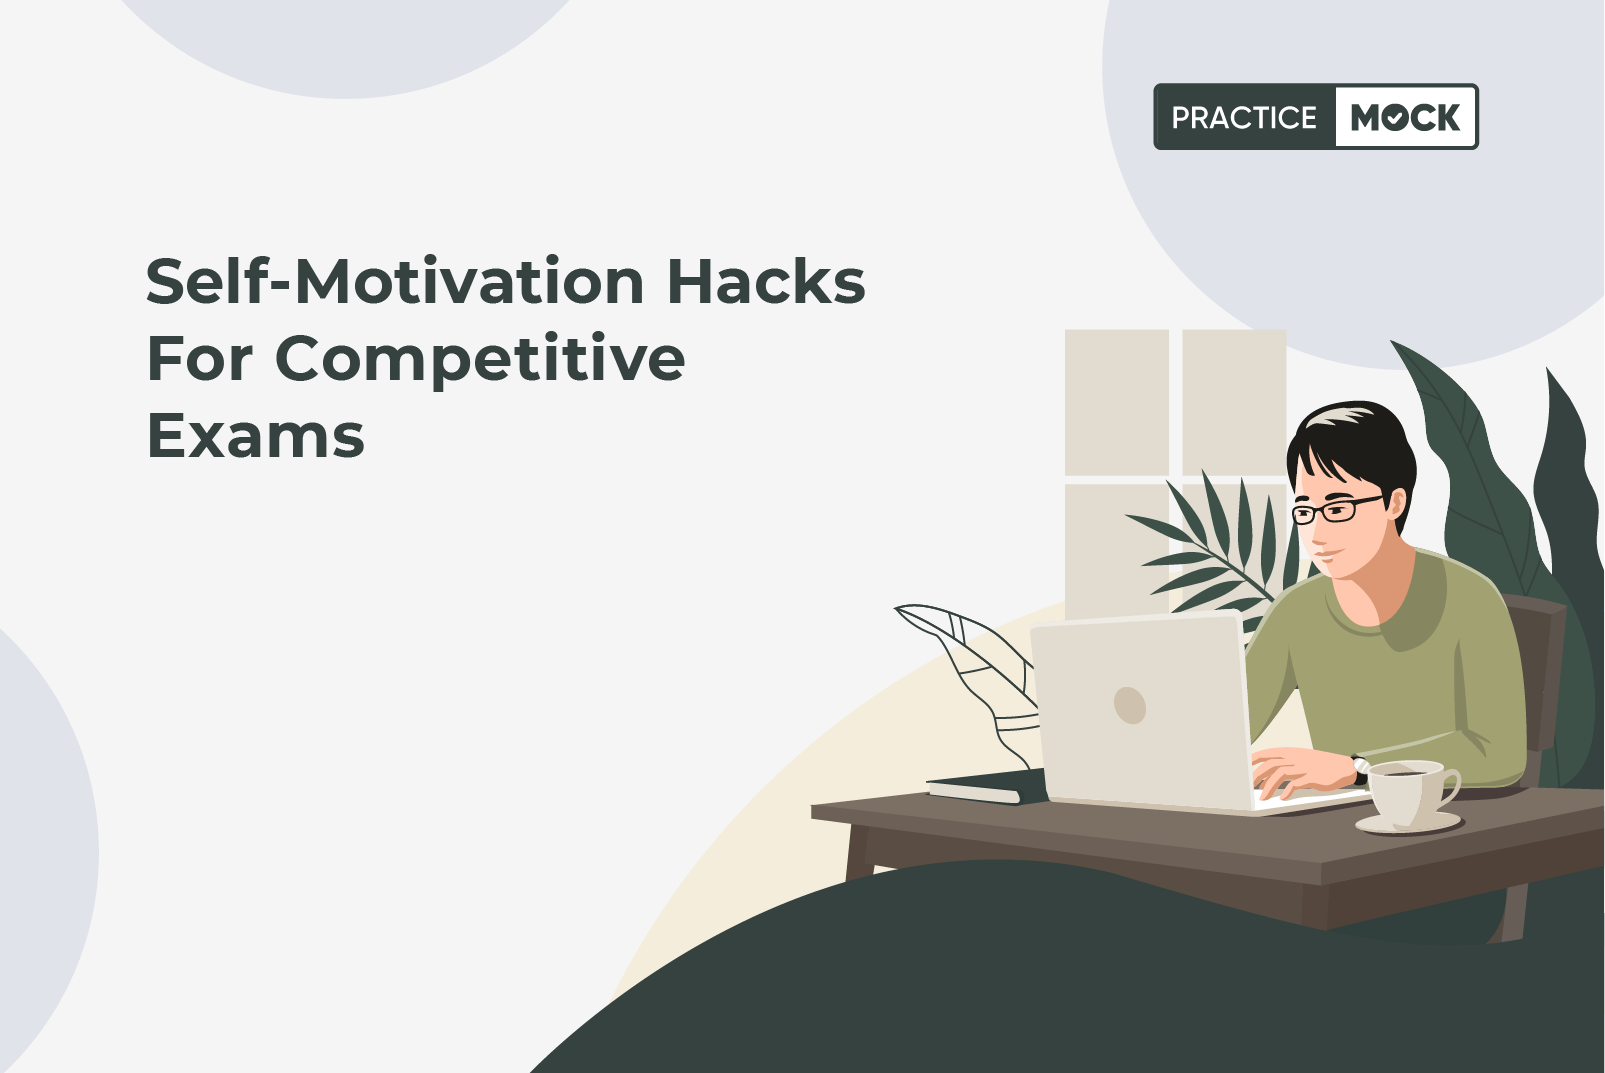 Self-Motivation Hacks For Competitive Exams